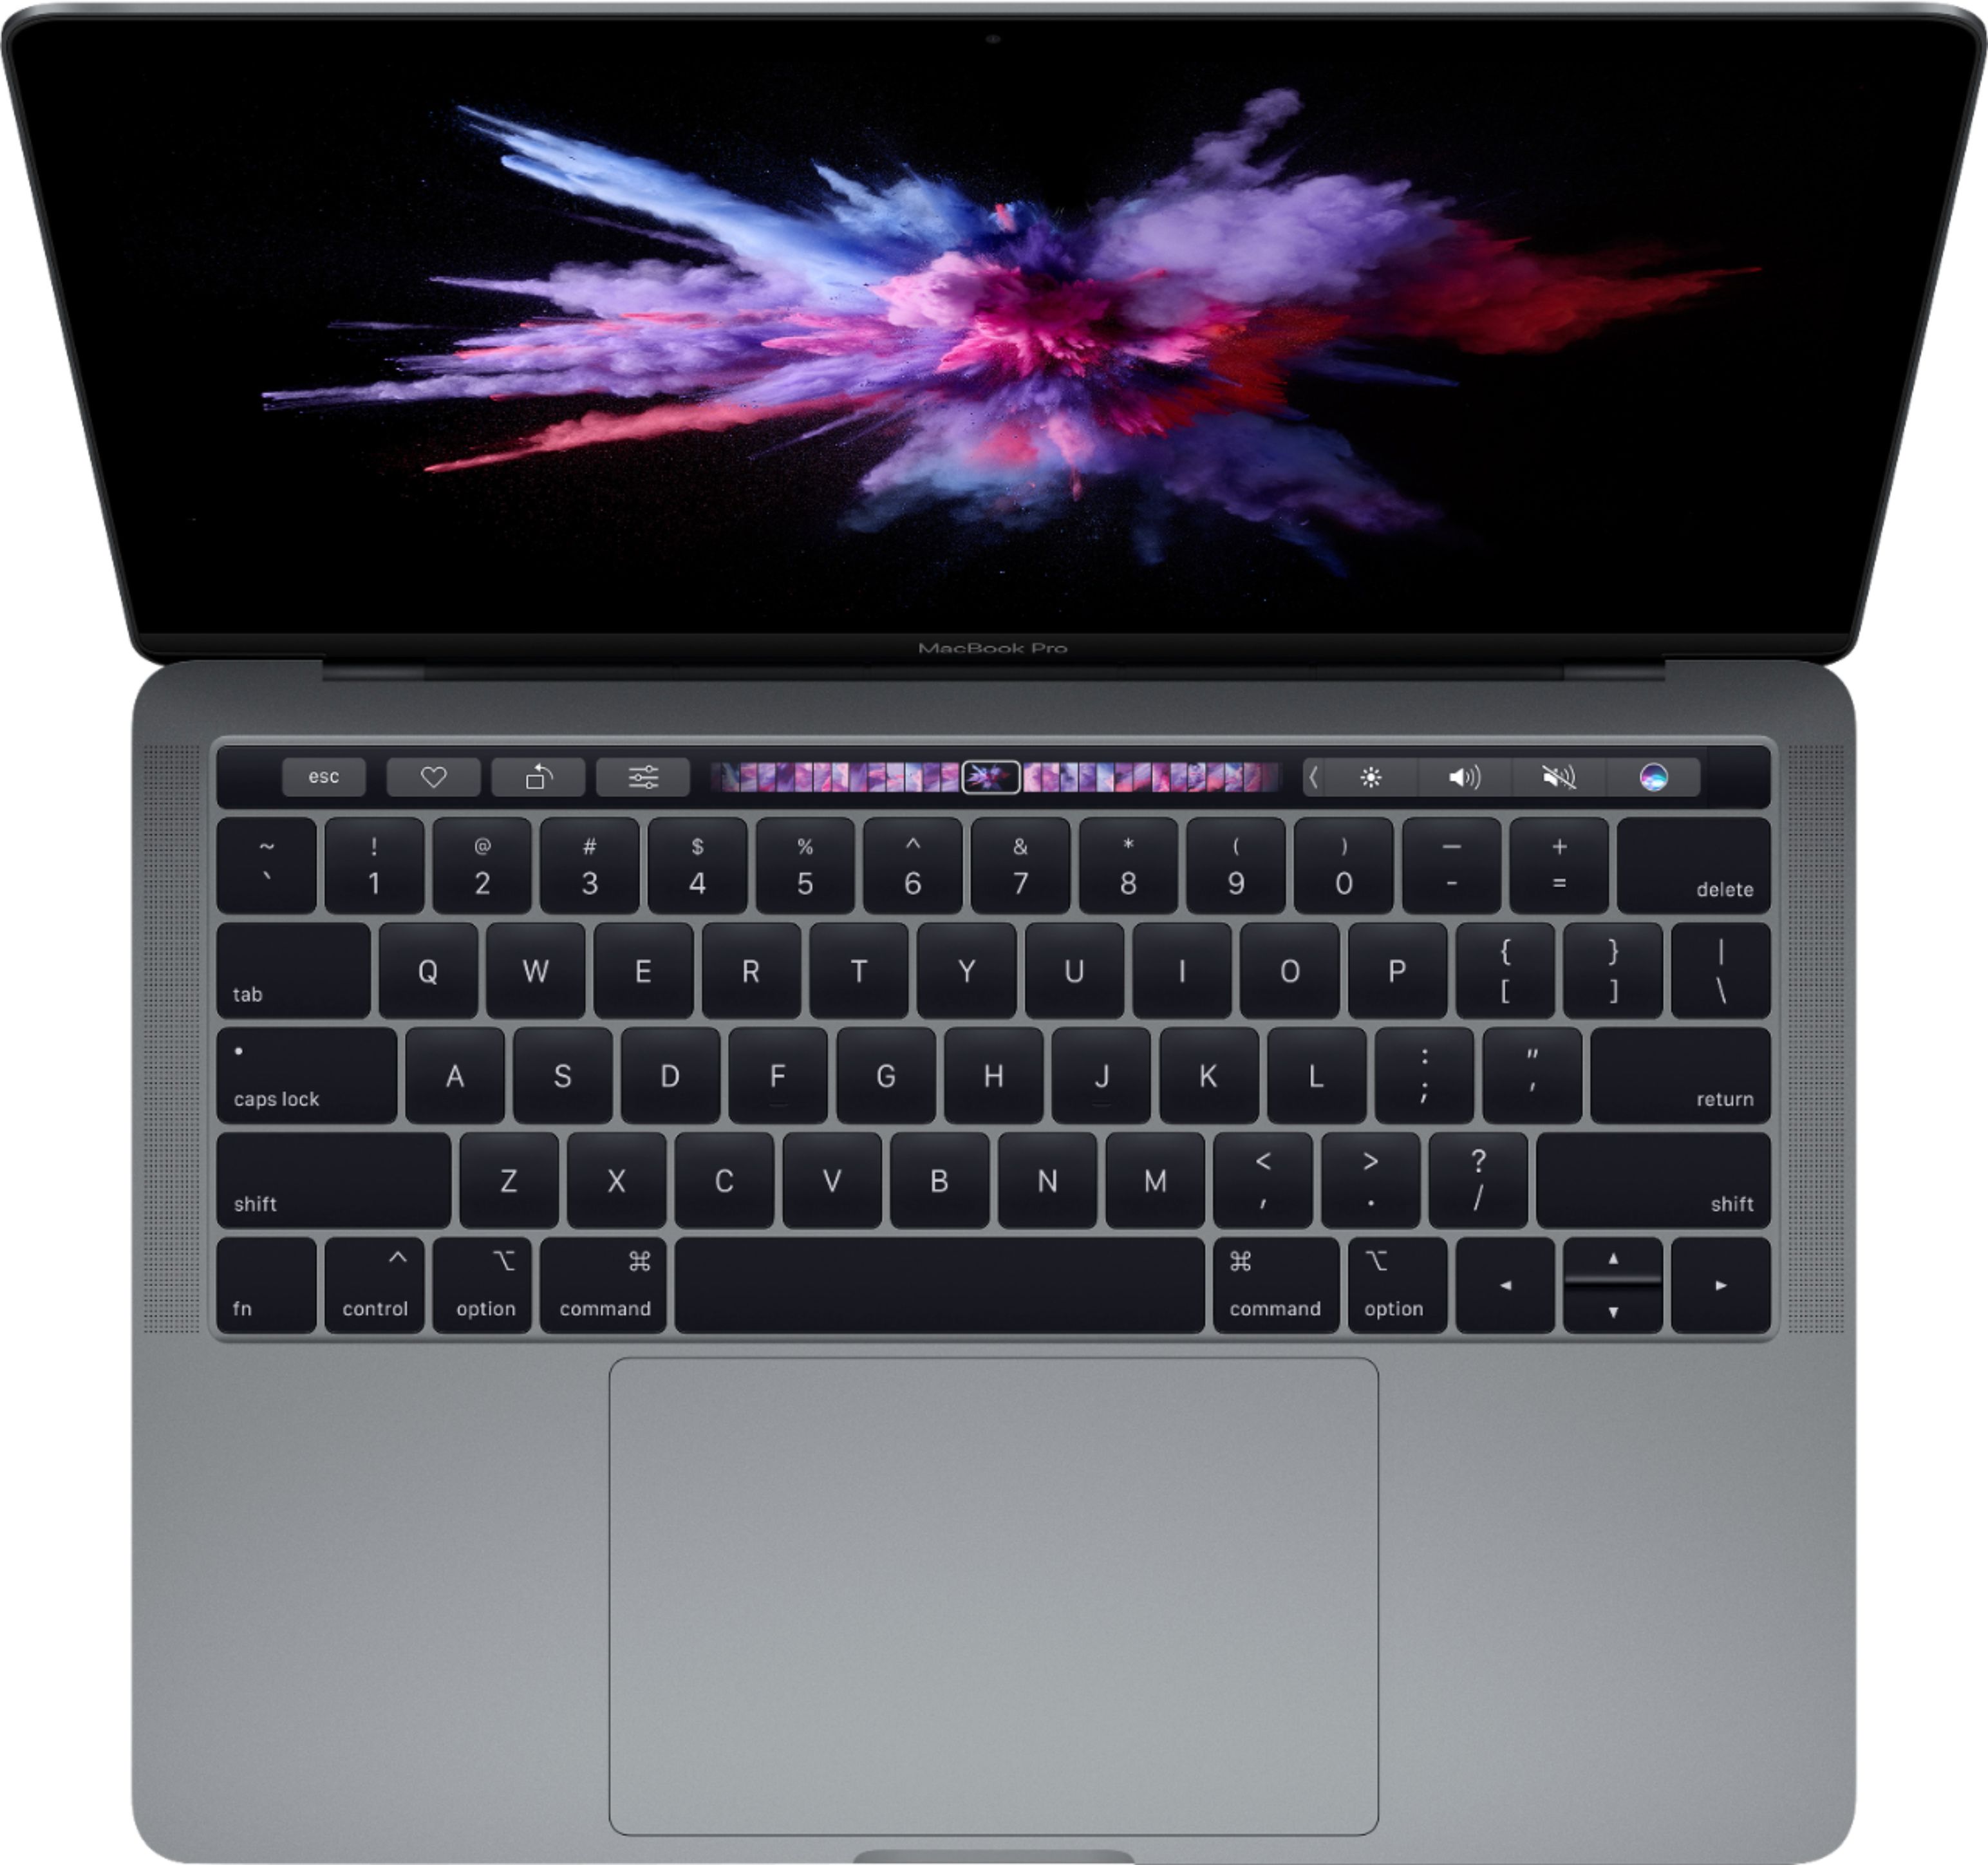 Apple MacBook Pro Display with Touch Bar Intel Core i5 8GB Memory 128GB SSD Space Gray Buy